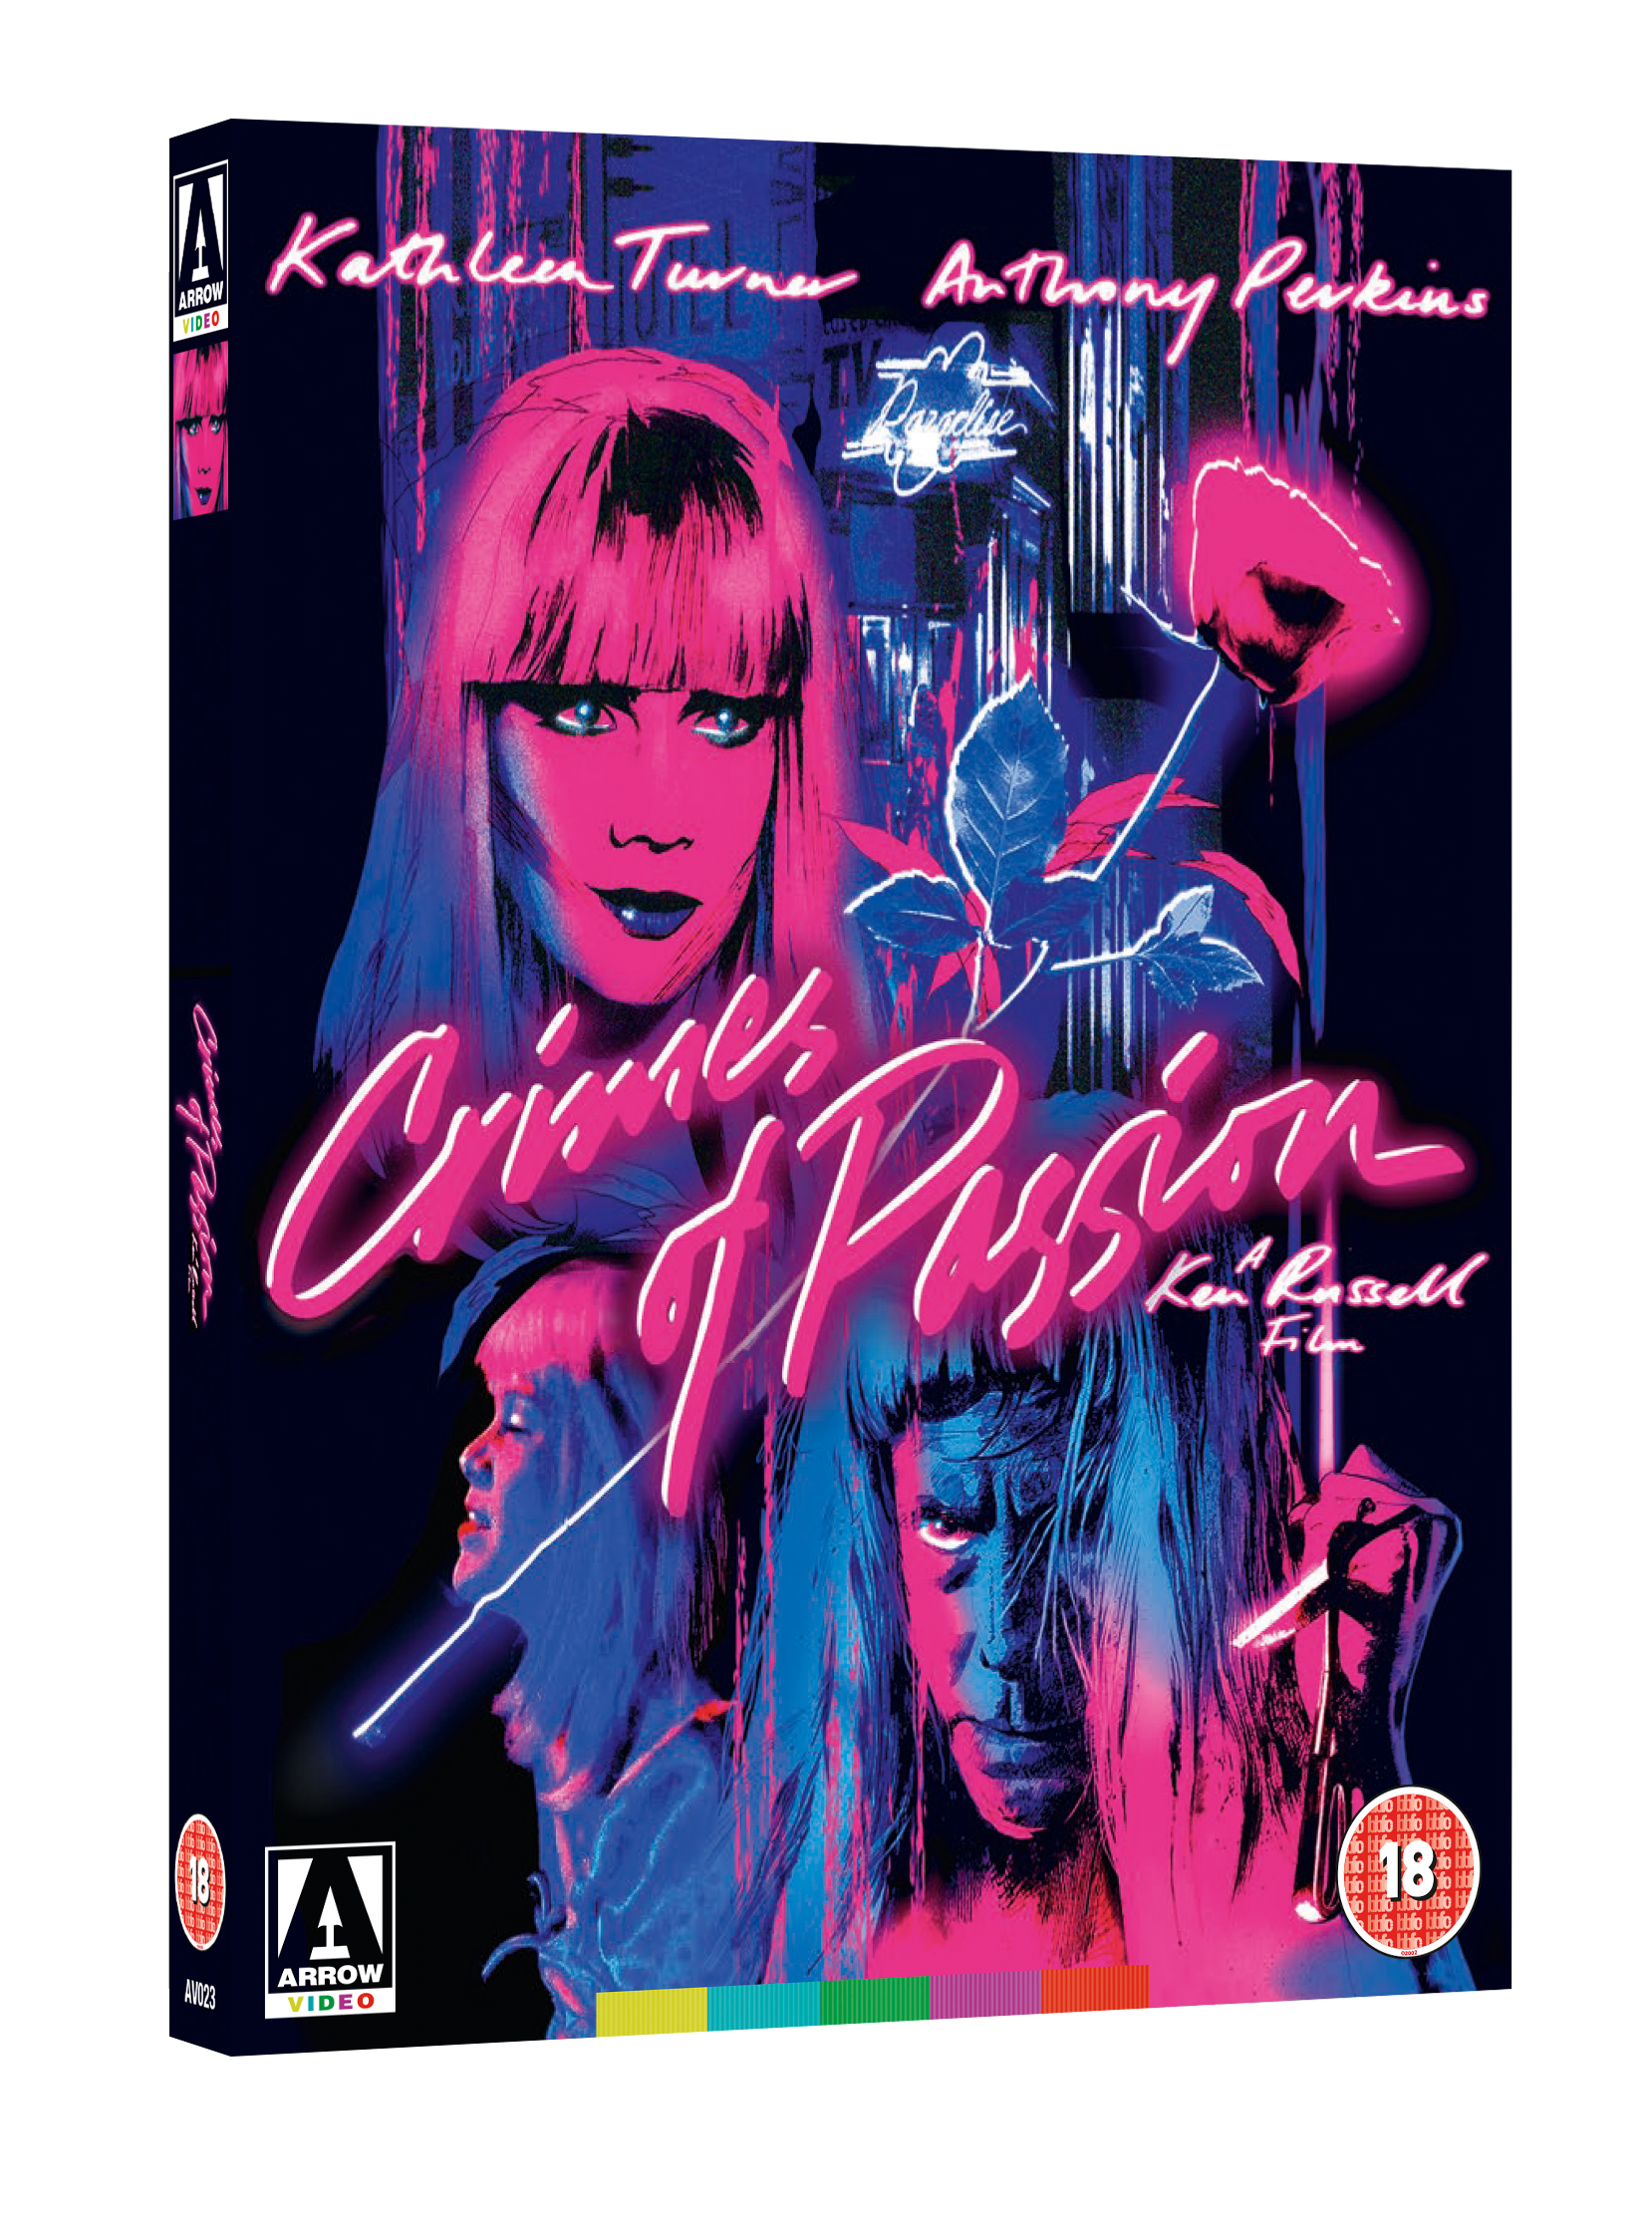 Crimes Of Passion Blu-ray review: A Psycho-sexual black comedy